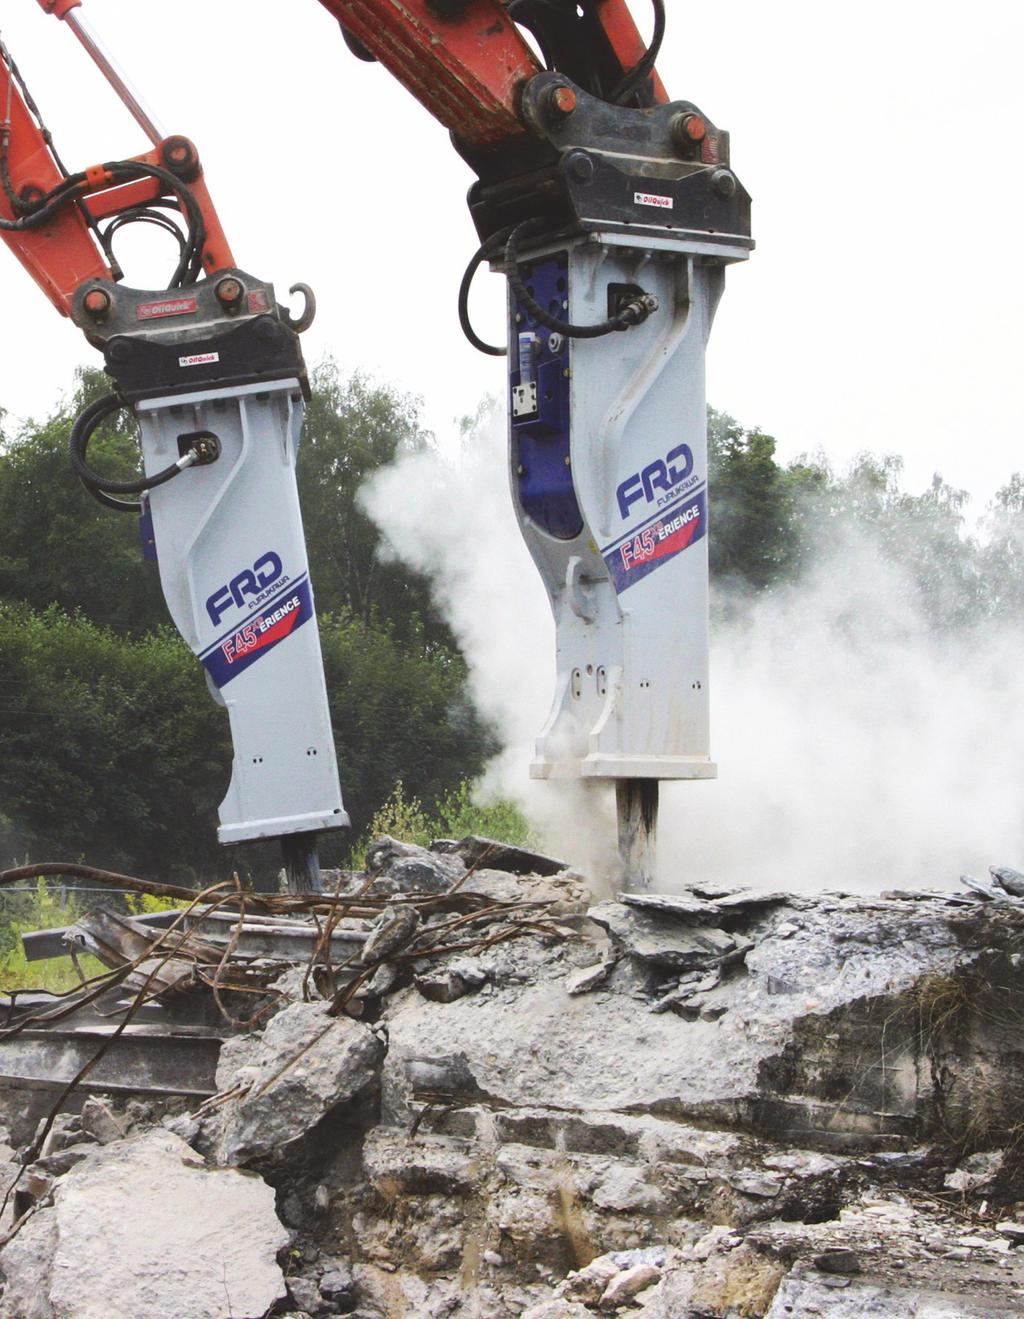 LOWEST LIFETIME COST Today Furukawa Rock Drill is a worldwide specialist in demolition and rock excavation with a wide range of carefully designed and robust breakers, attachments and crawler drills.